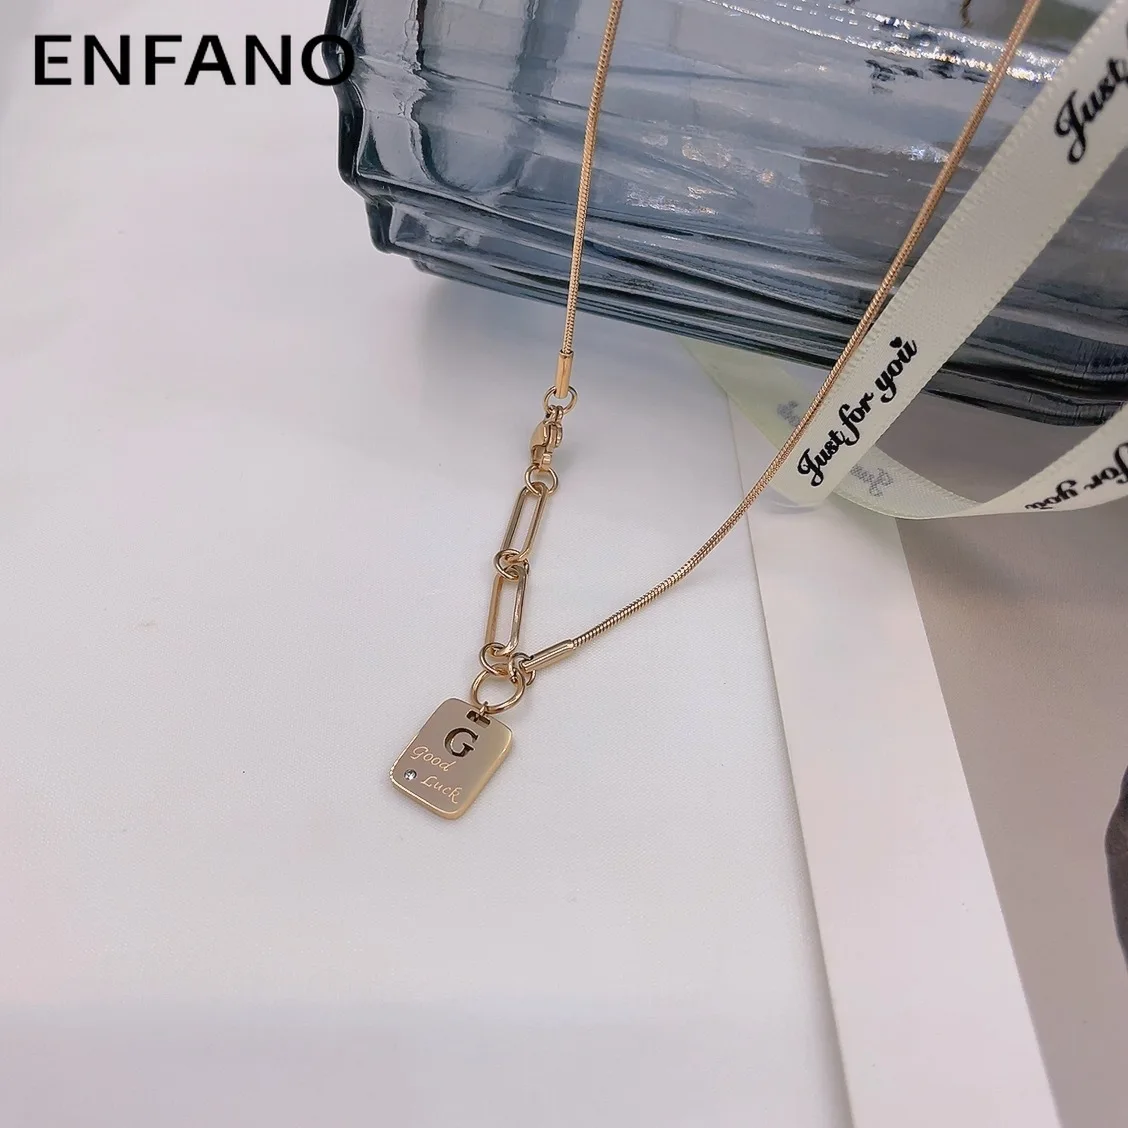 

Enfano Necklace Personalized Fashion Snake Bones Chain Independent Packaging Geometric Ladies